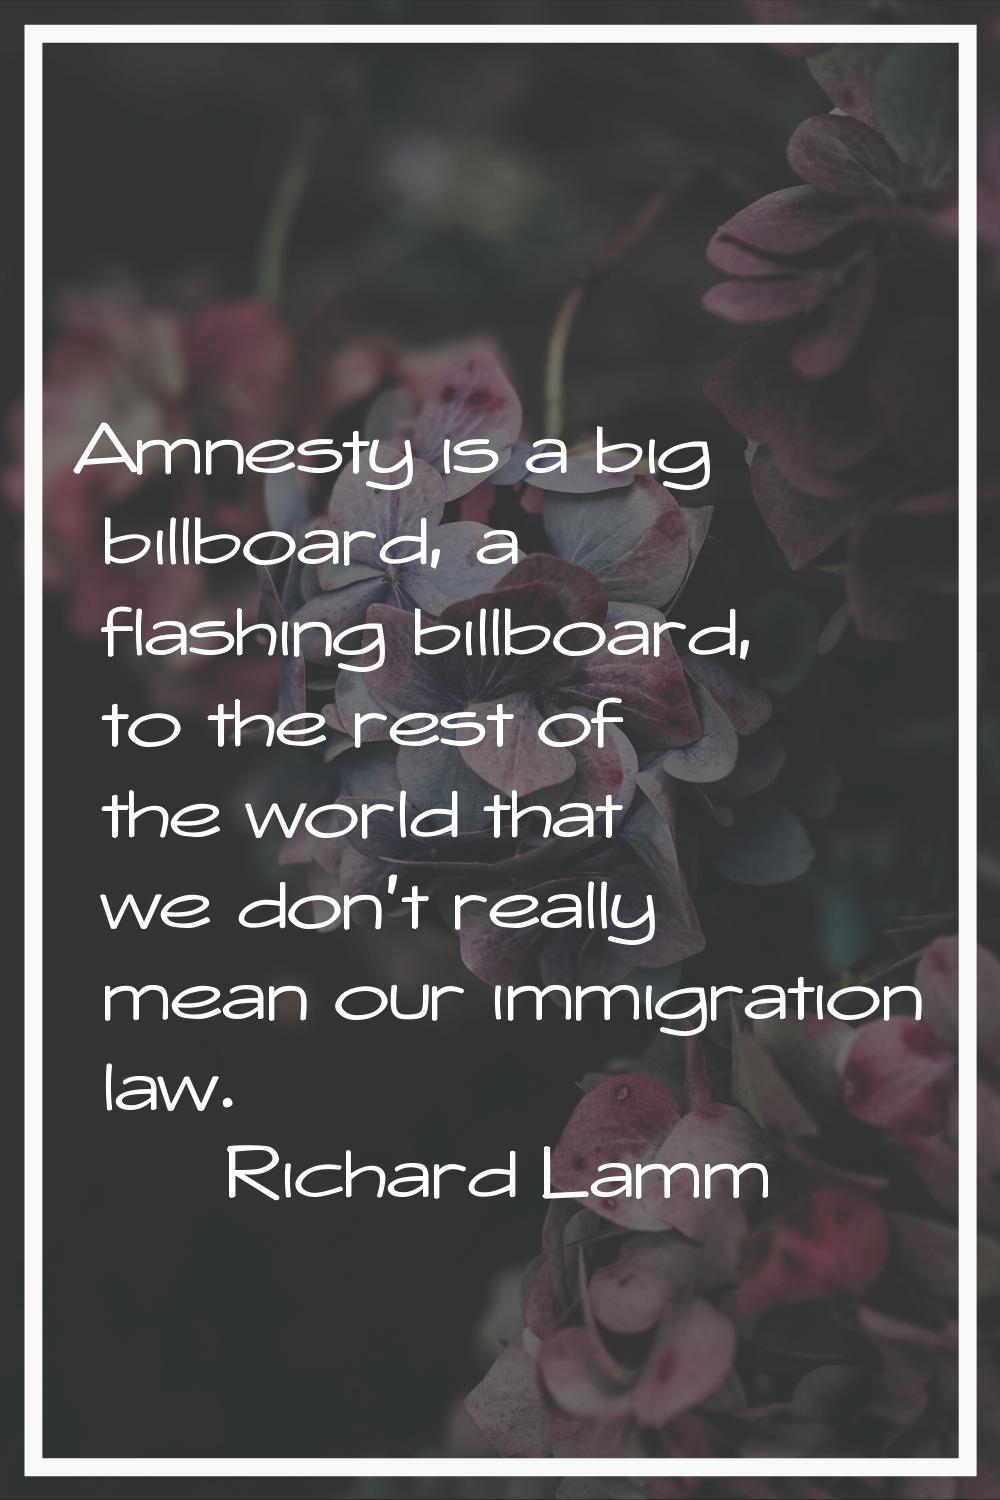 Amnesty is a big billboard, a flashing billboard, to the rest of the world that we don't really mea